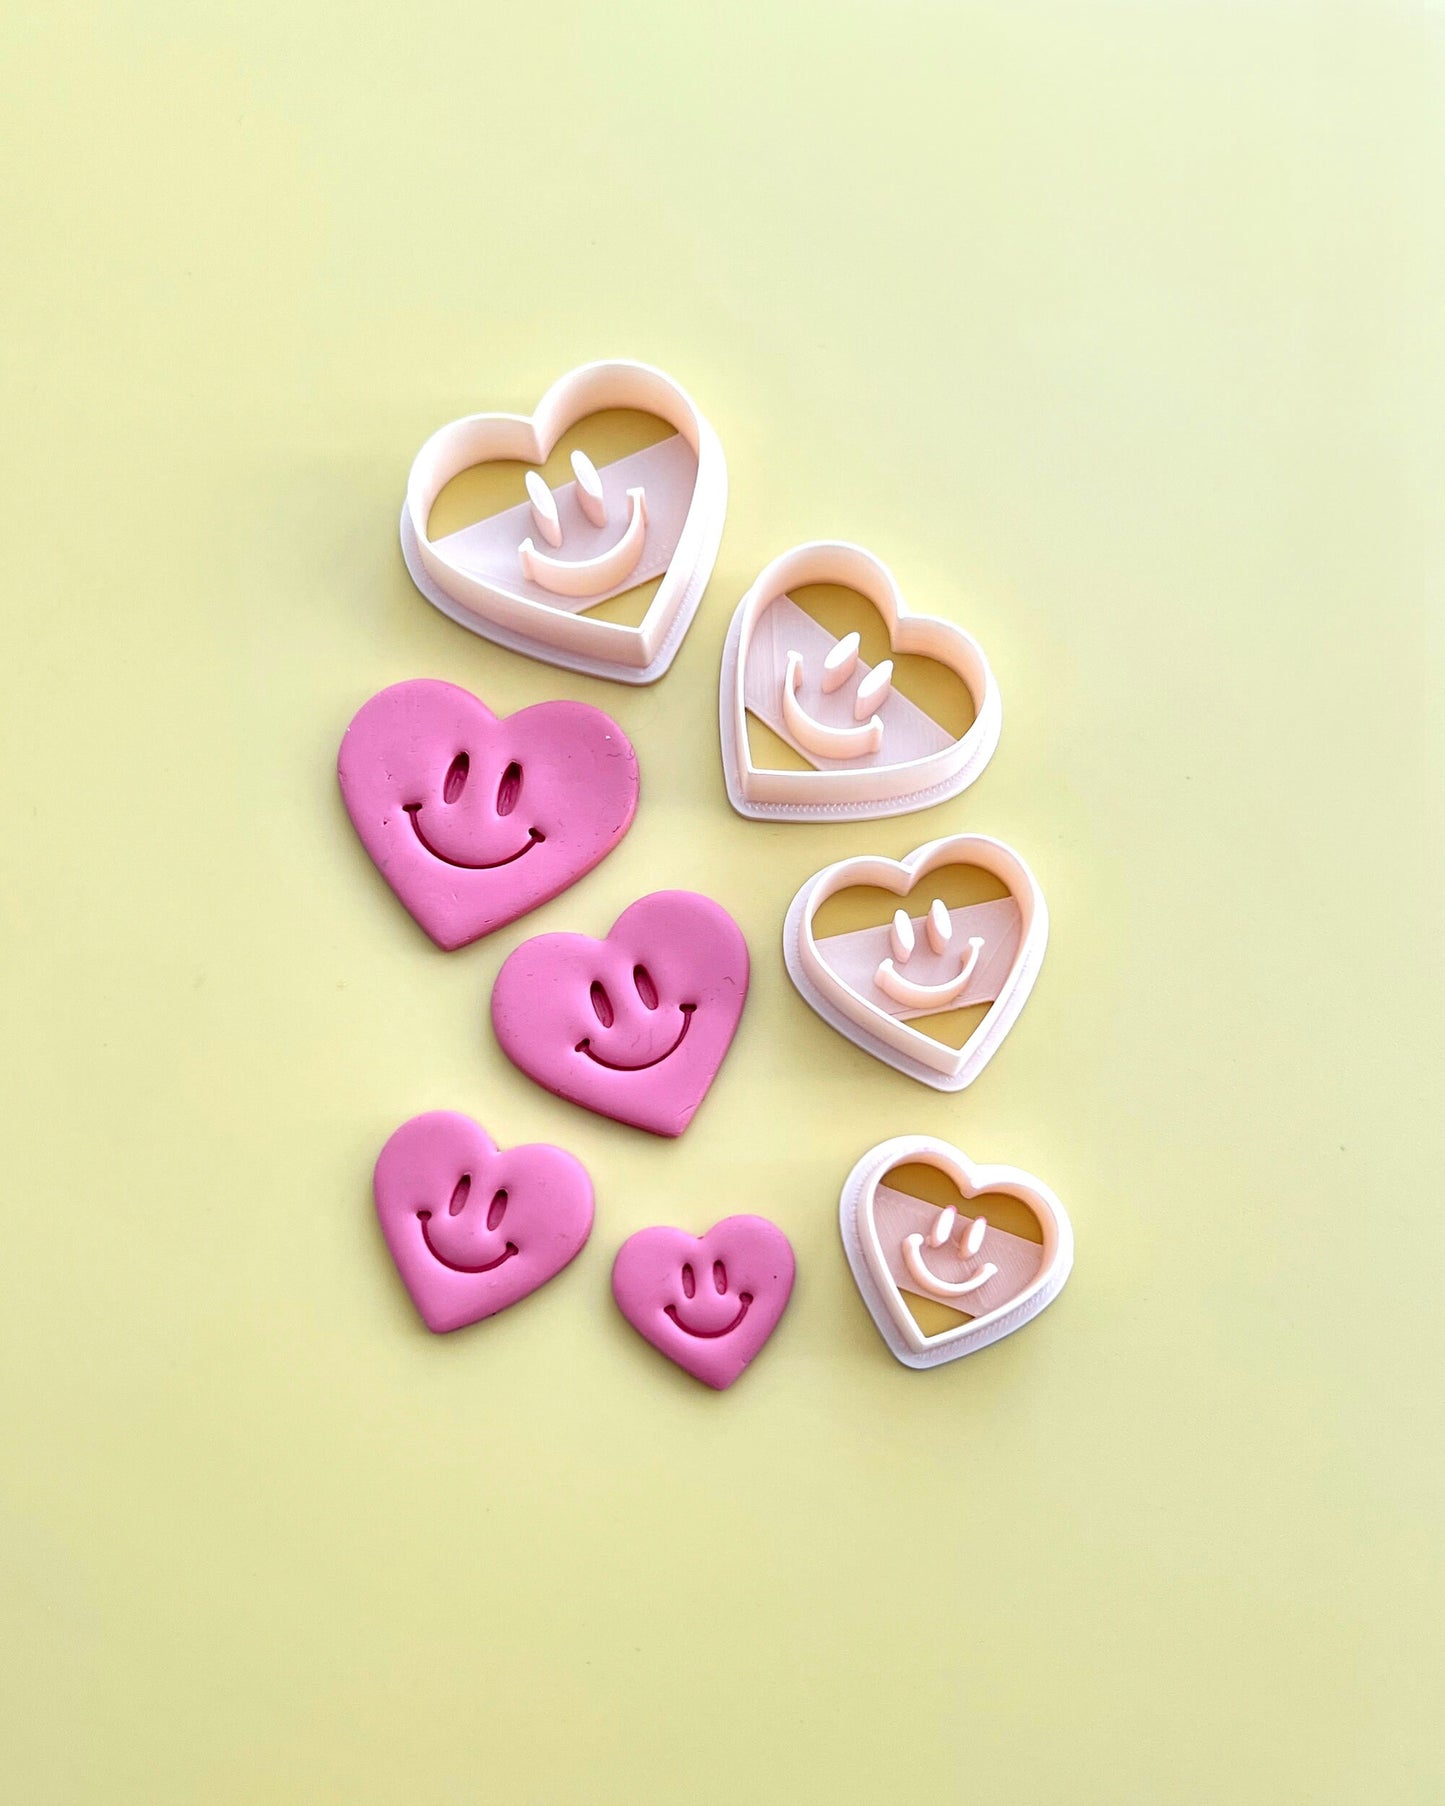 Smiley Heart Polymer Clay Cutters